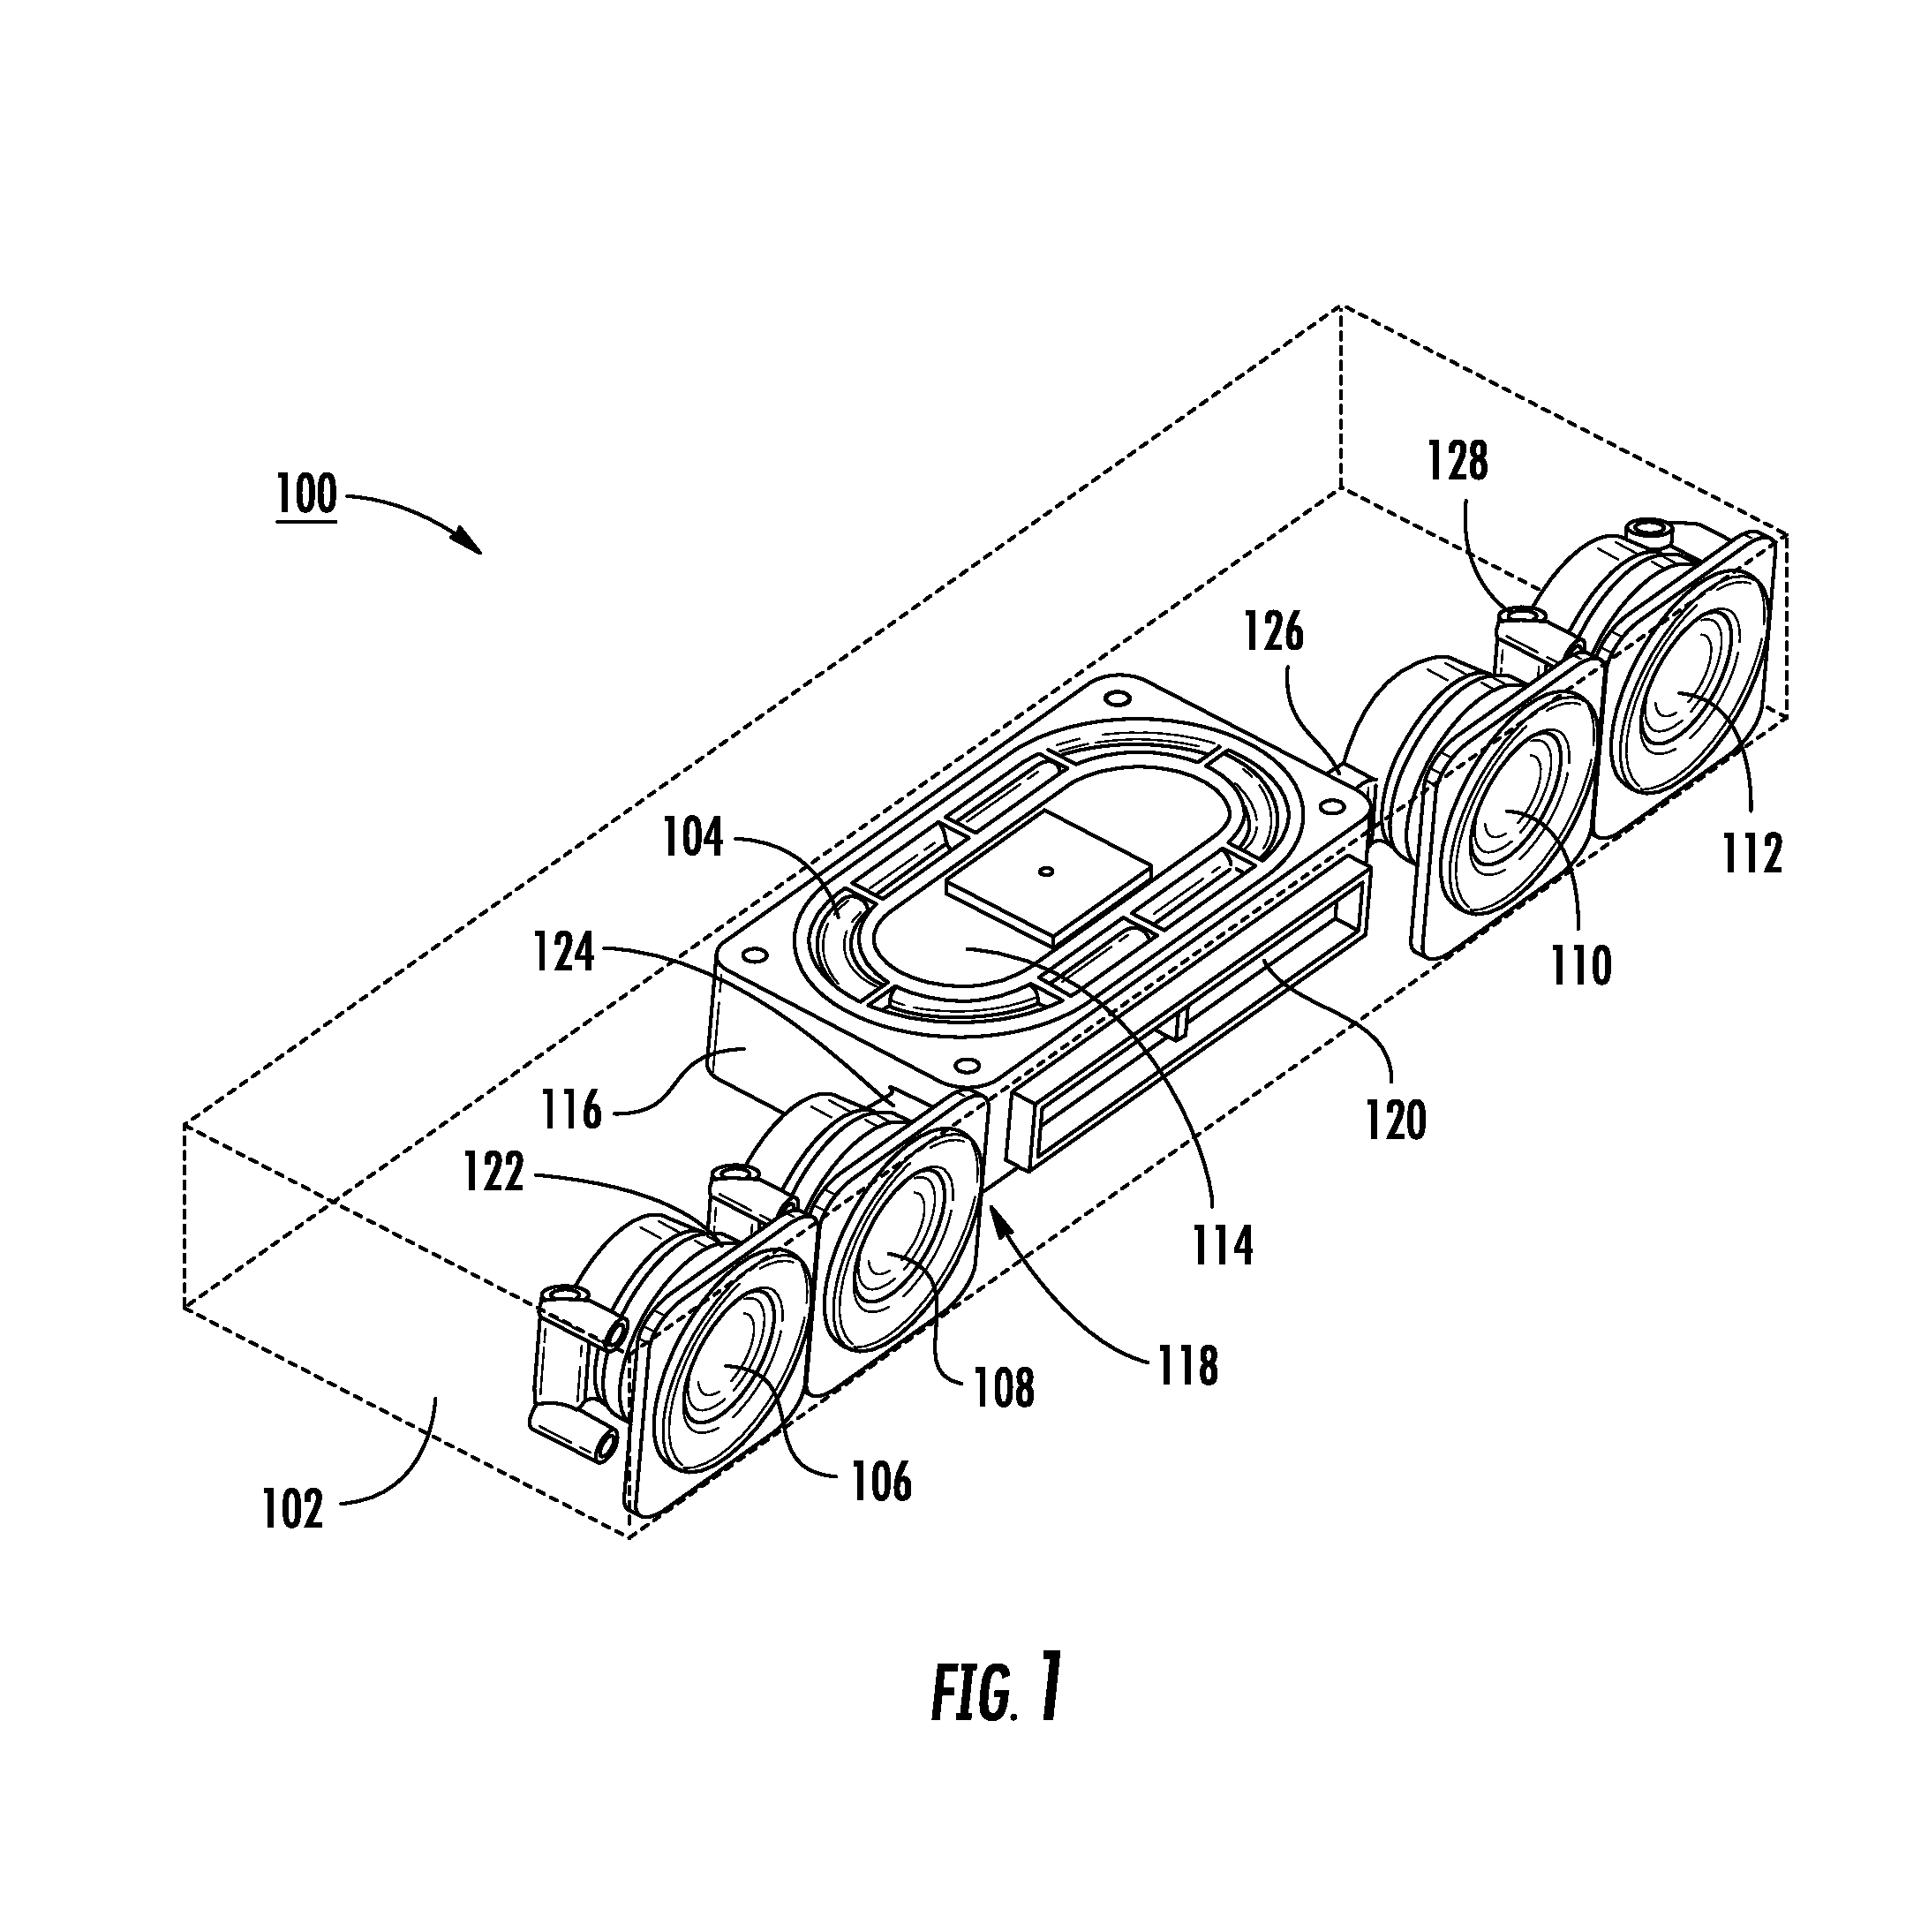 Convective Airflow Using a Passive Radiator